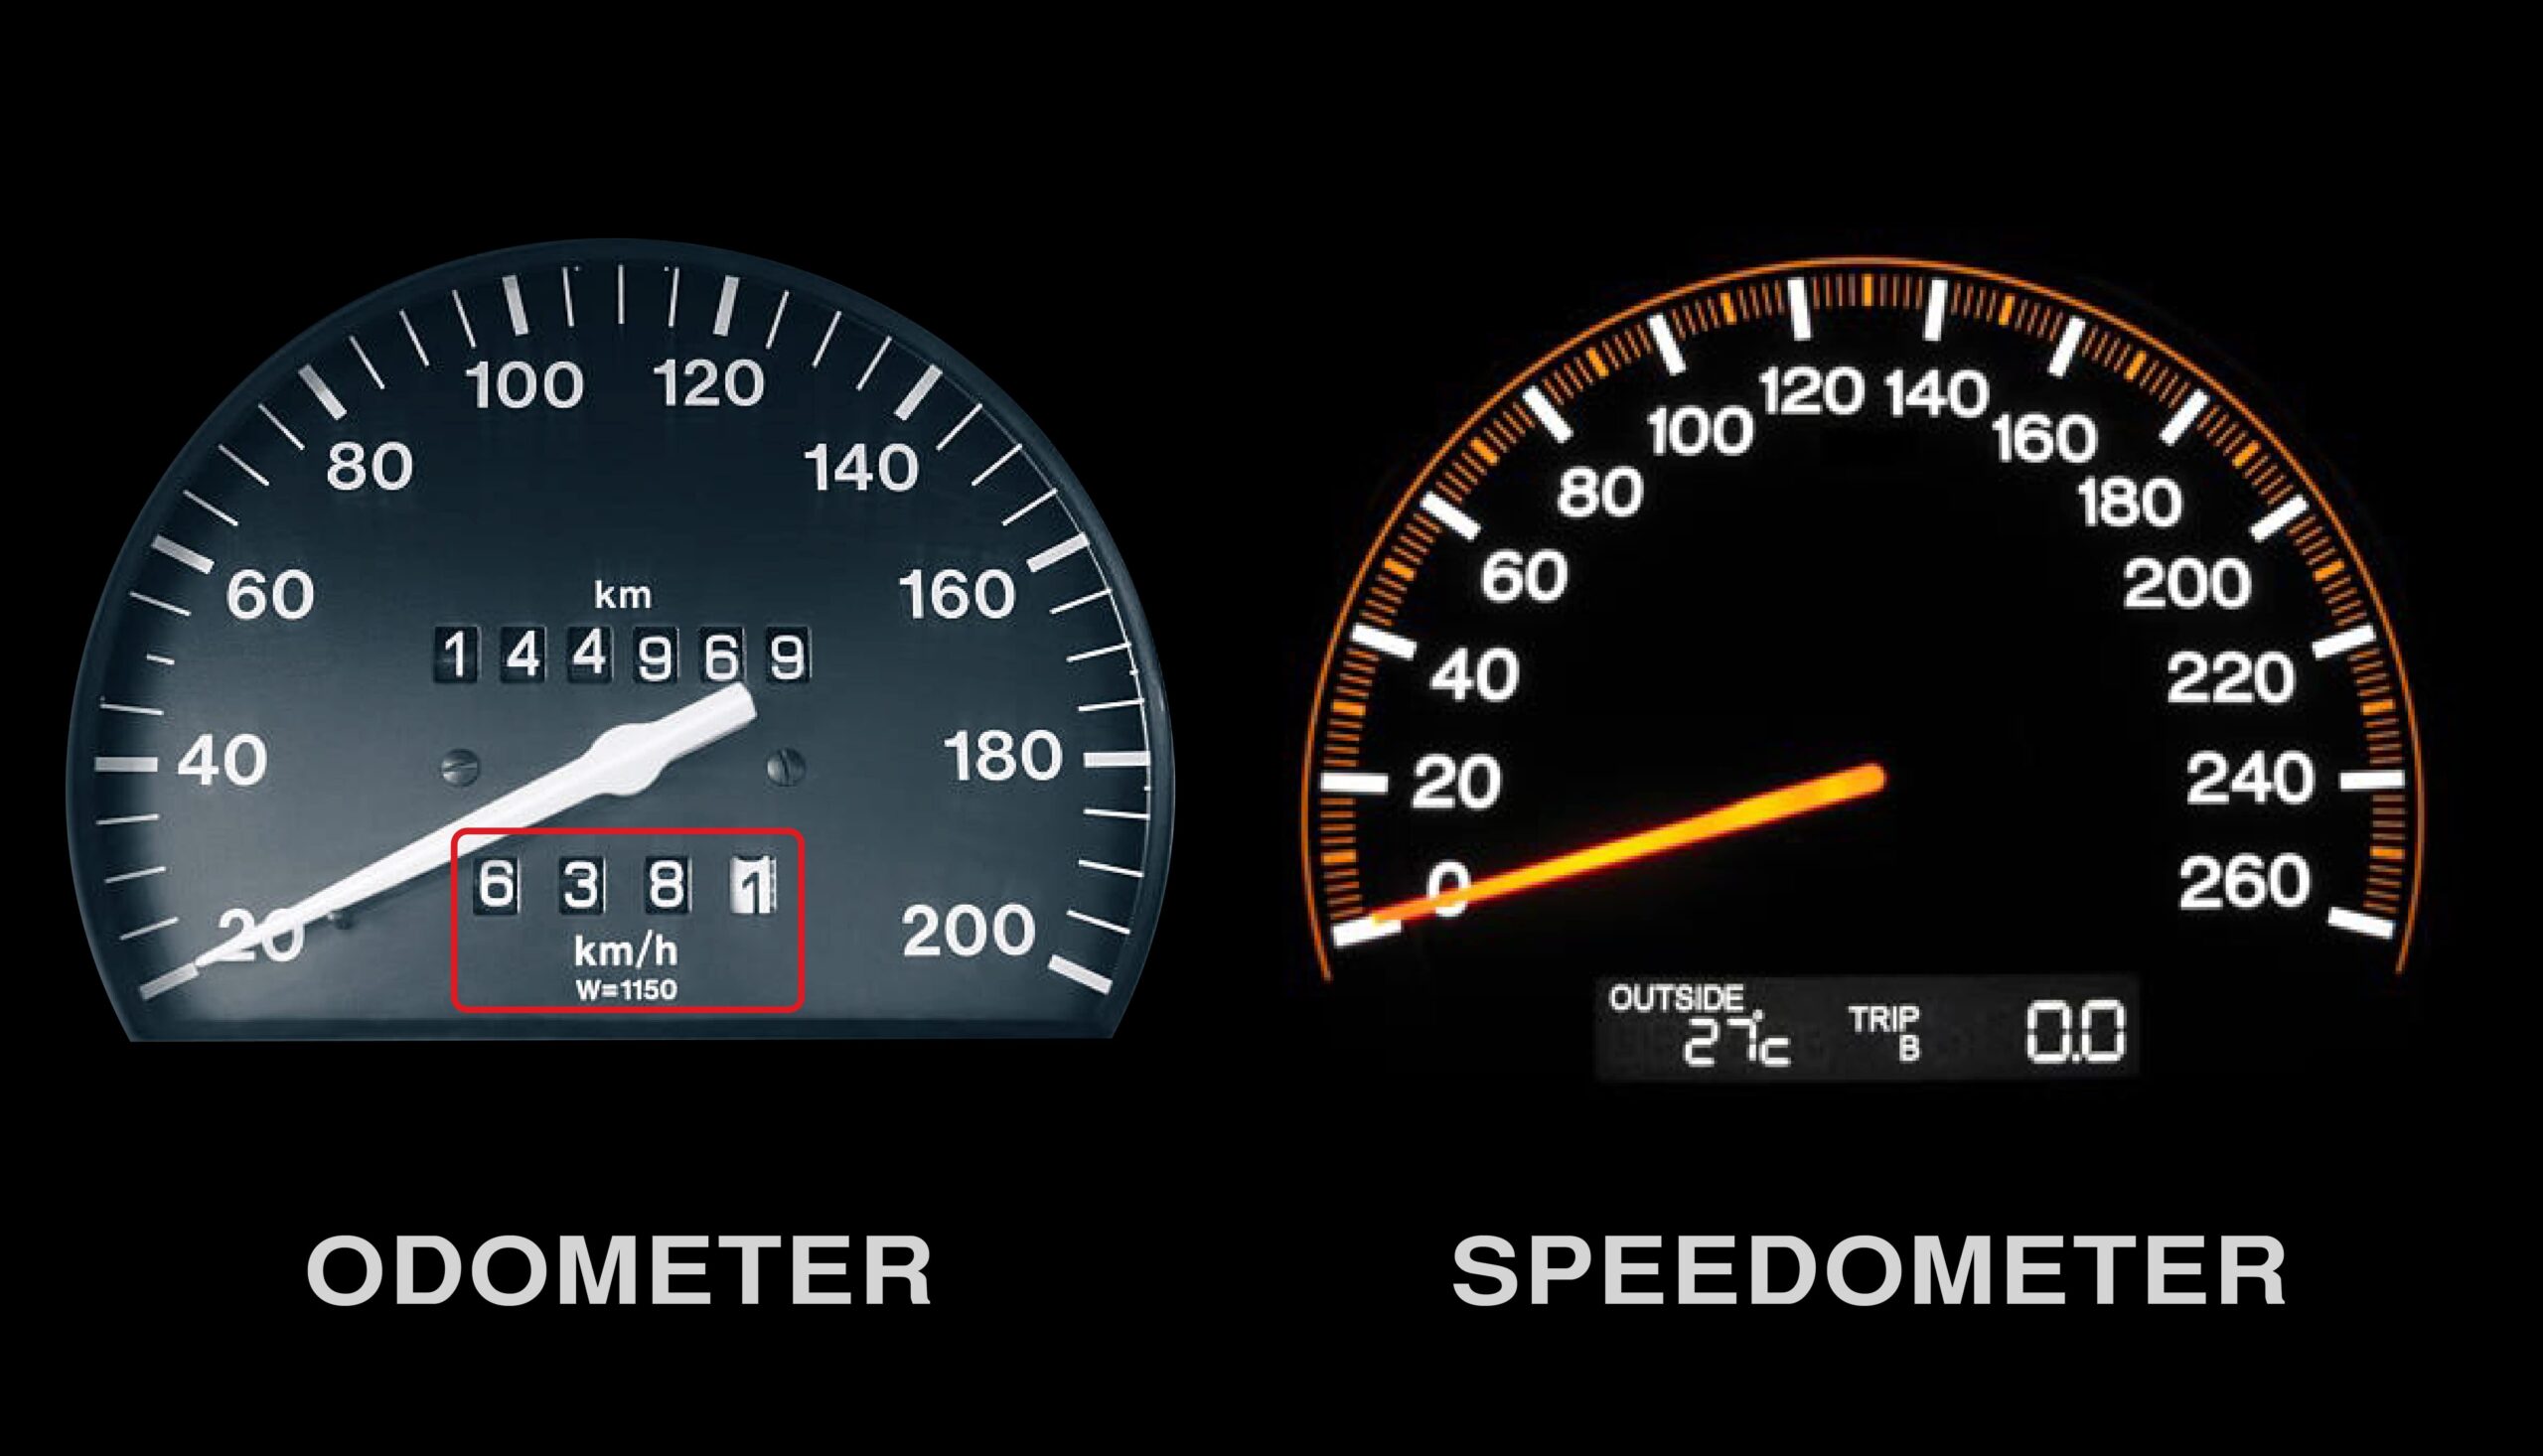 What does the odometer and speedometer of an automobile measure